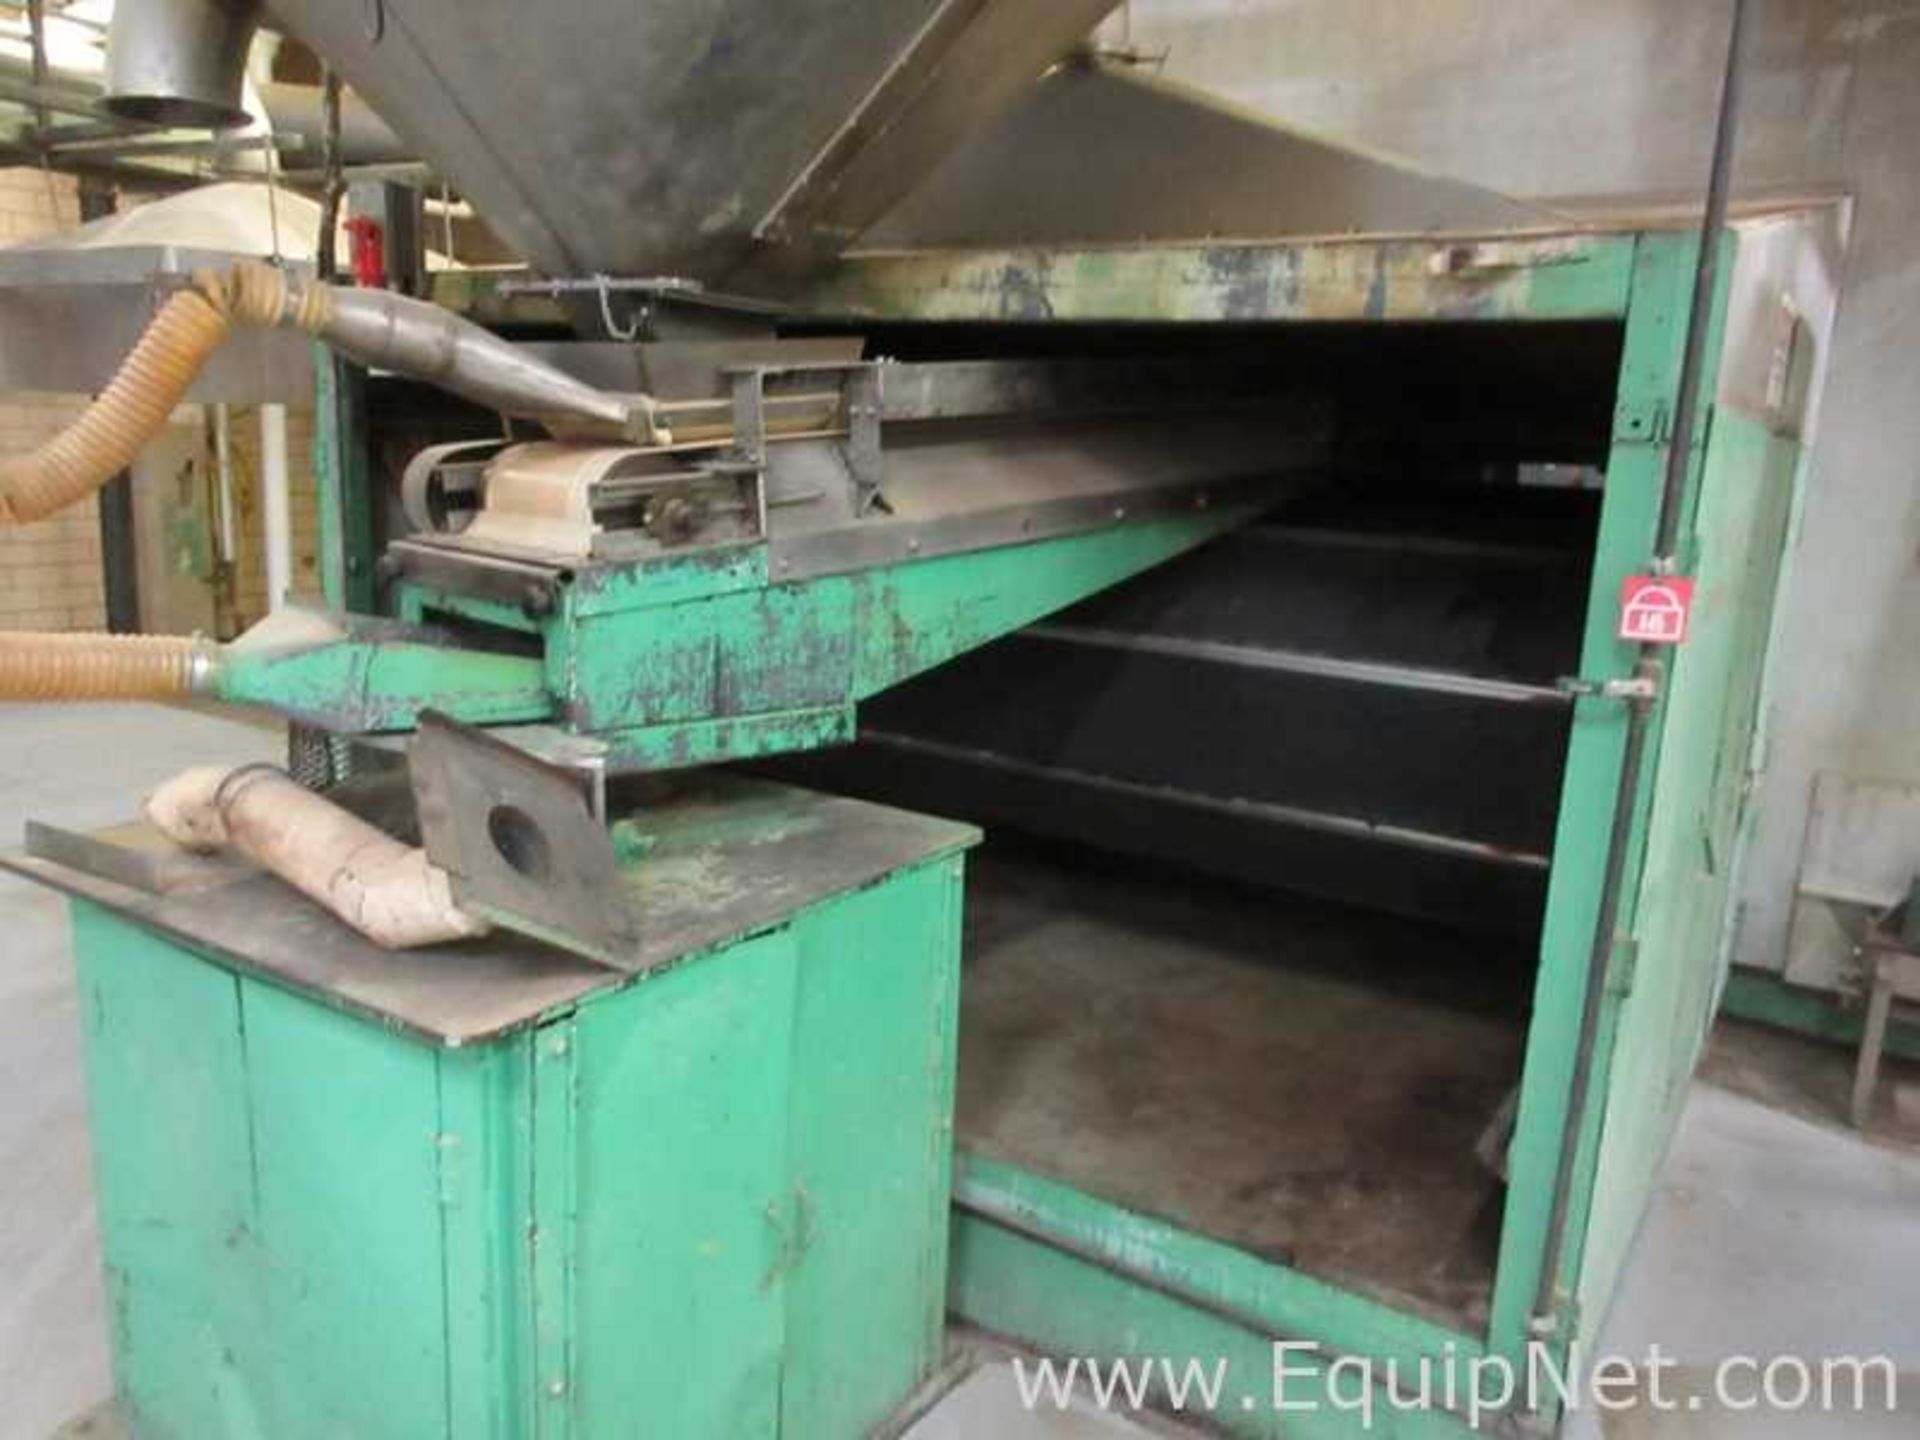 EQUIPNET LISTING #597061; REMOVAL COST: $0; DESCRIPTION: National Drying Machinery Belt - Image 23 of 27